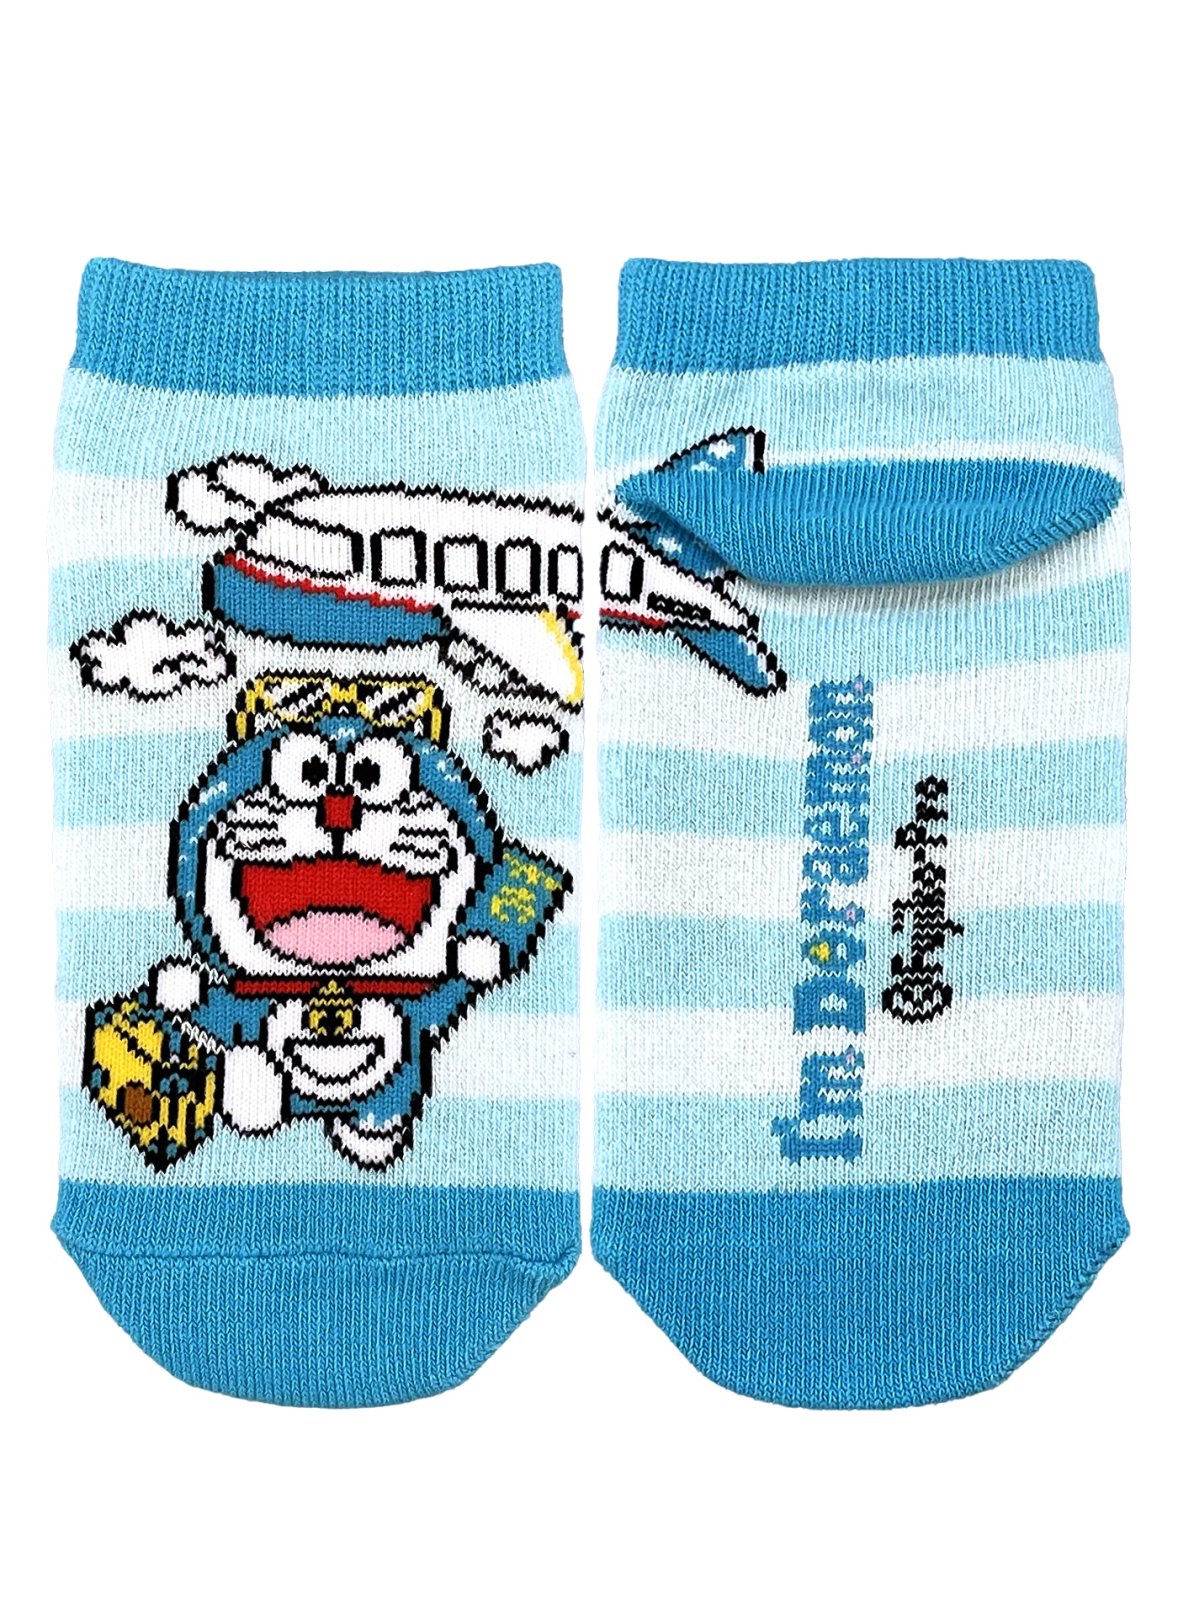 I'mDORAEMON 飛行機 キッズ靴下・ブルー<img class='new_mark_img2' src='https://img.shop-pro.jp/img/new/icons15.gif' style='border:none;display:inline;margin:0px;padding:0px;width:auto;' />